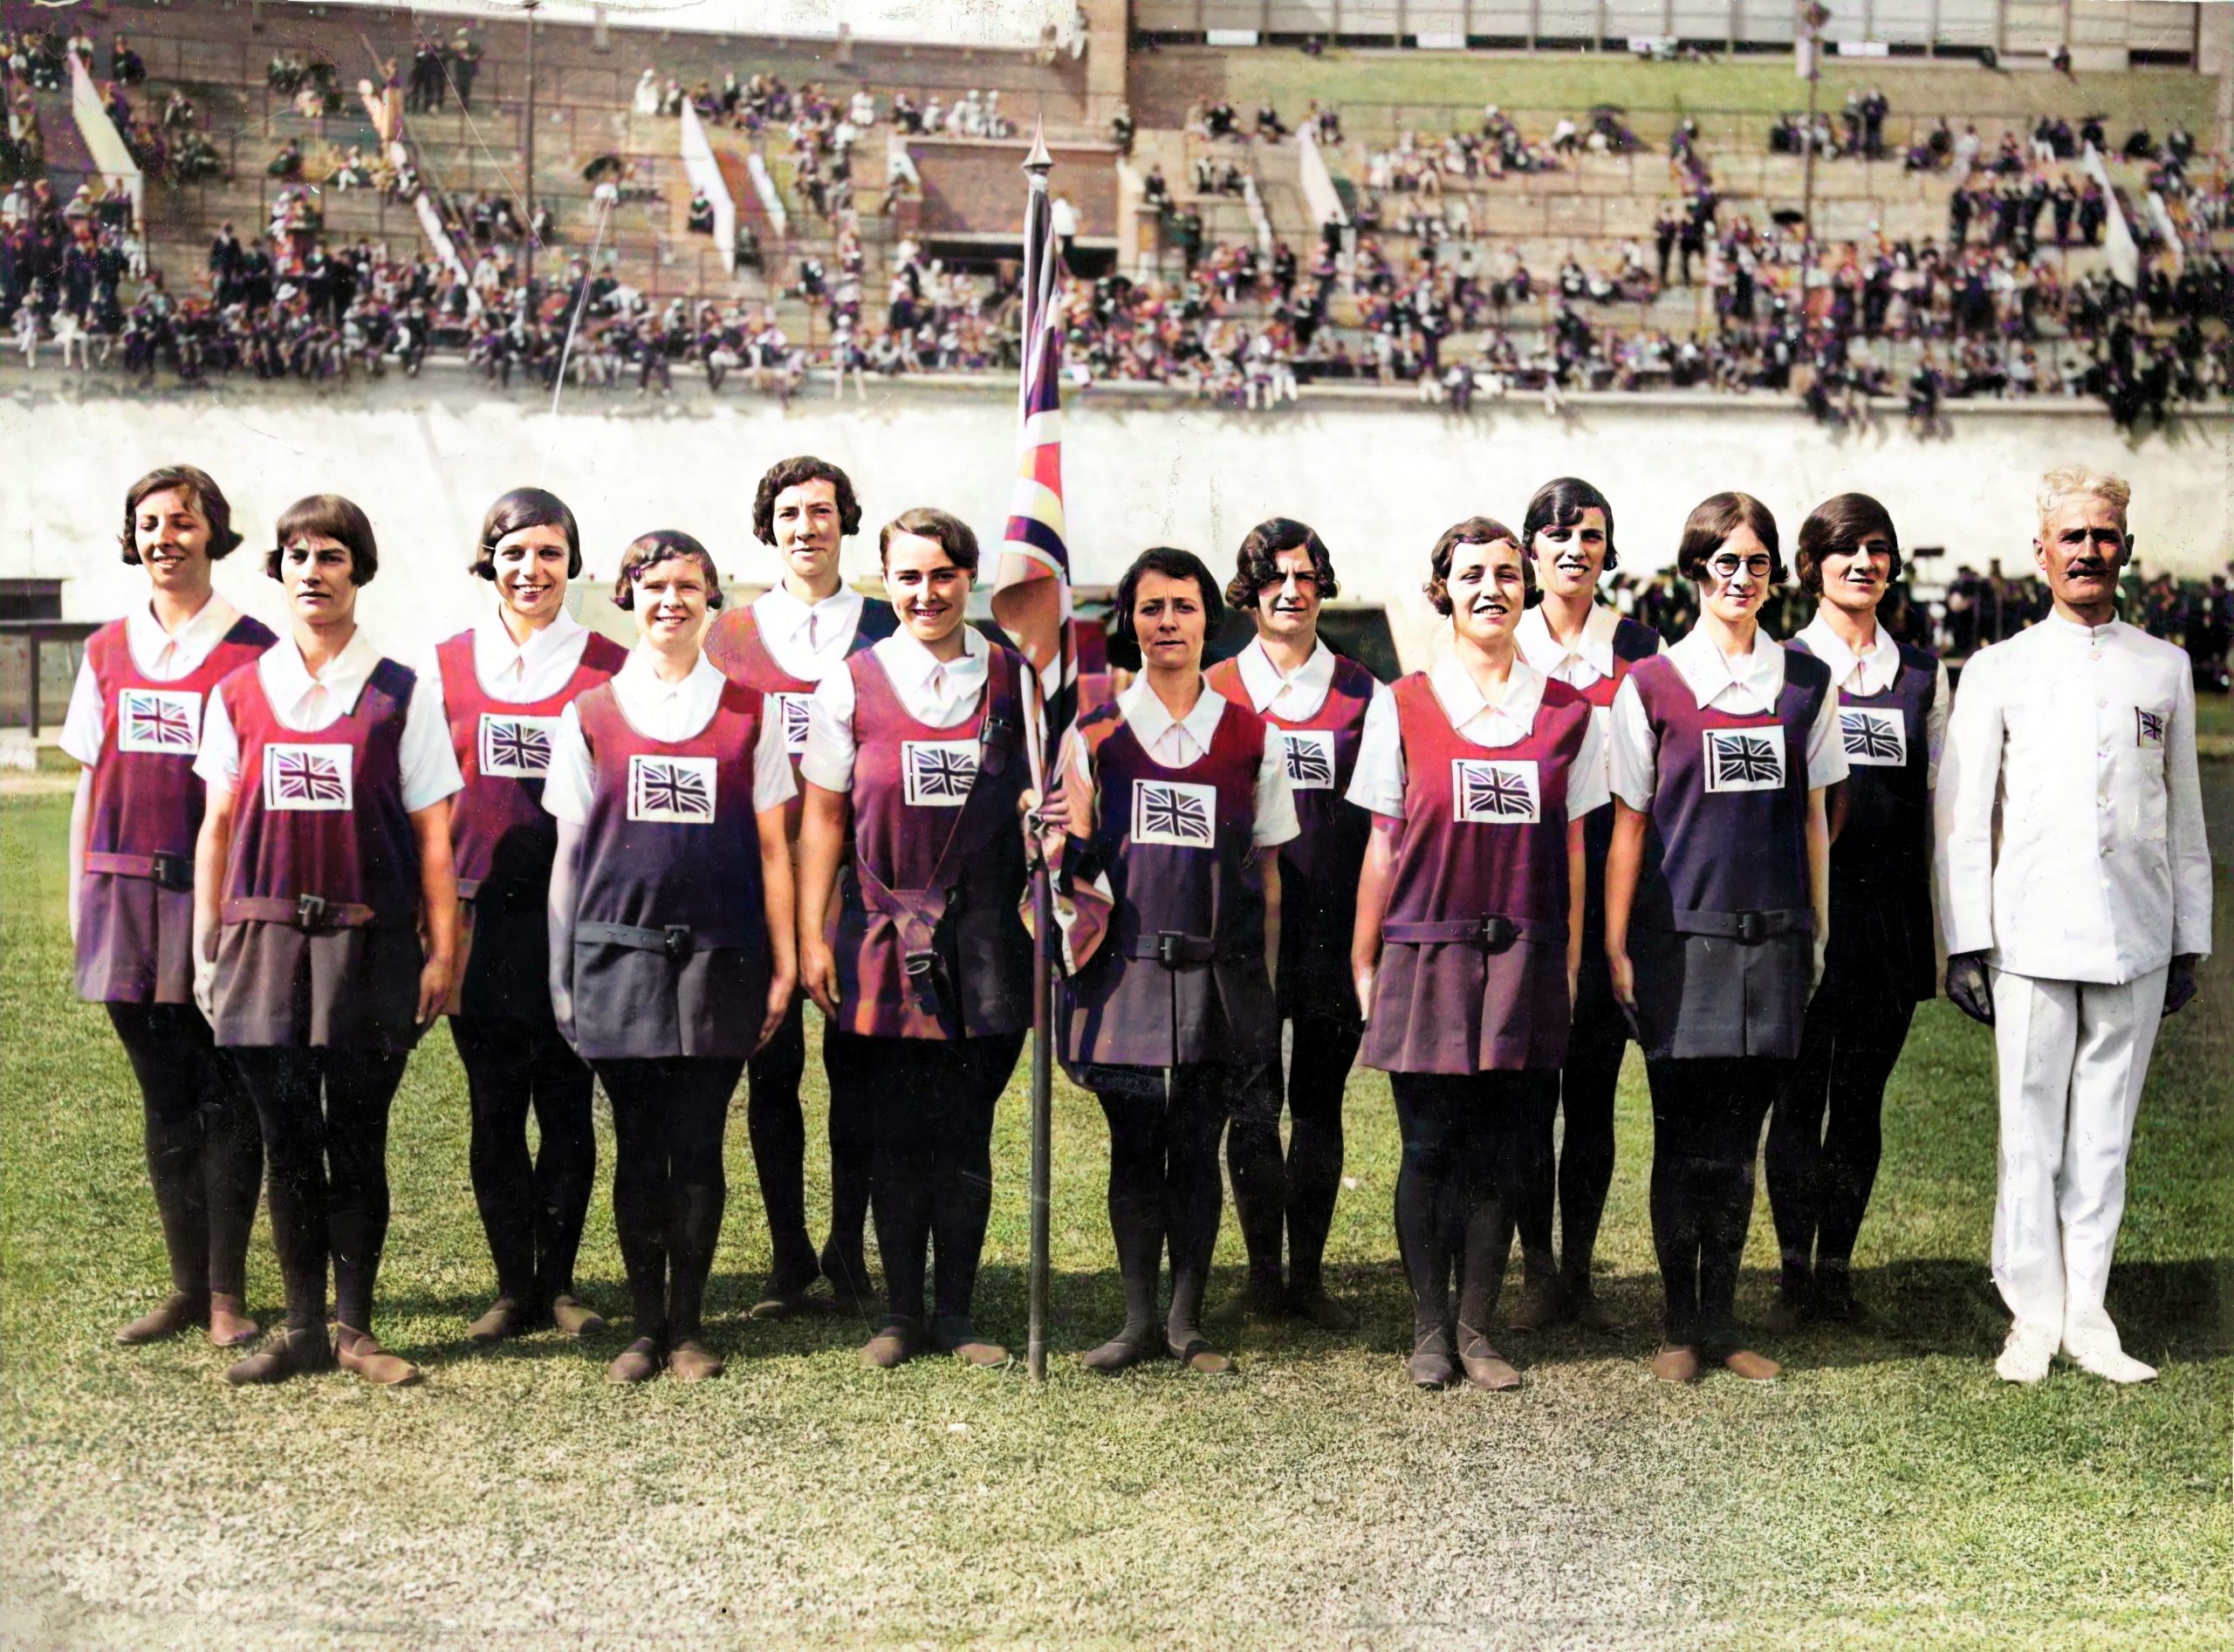 The 1928 GB women's team presenting with flag in Amsterdam - photo BG ARCHIVE